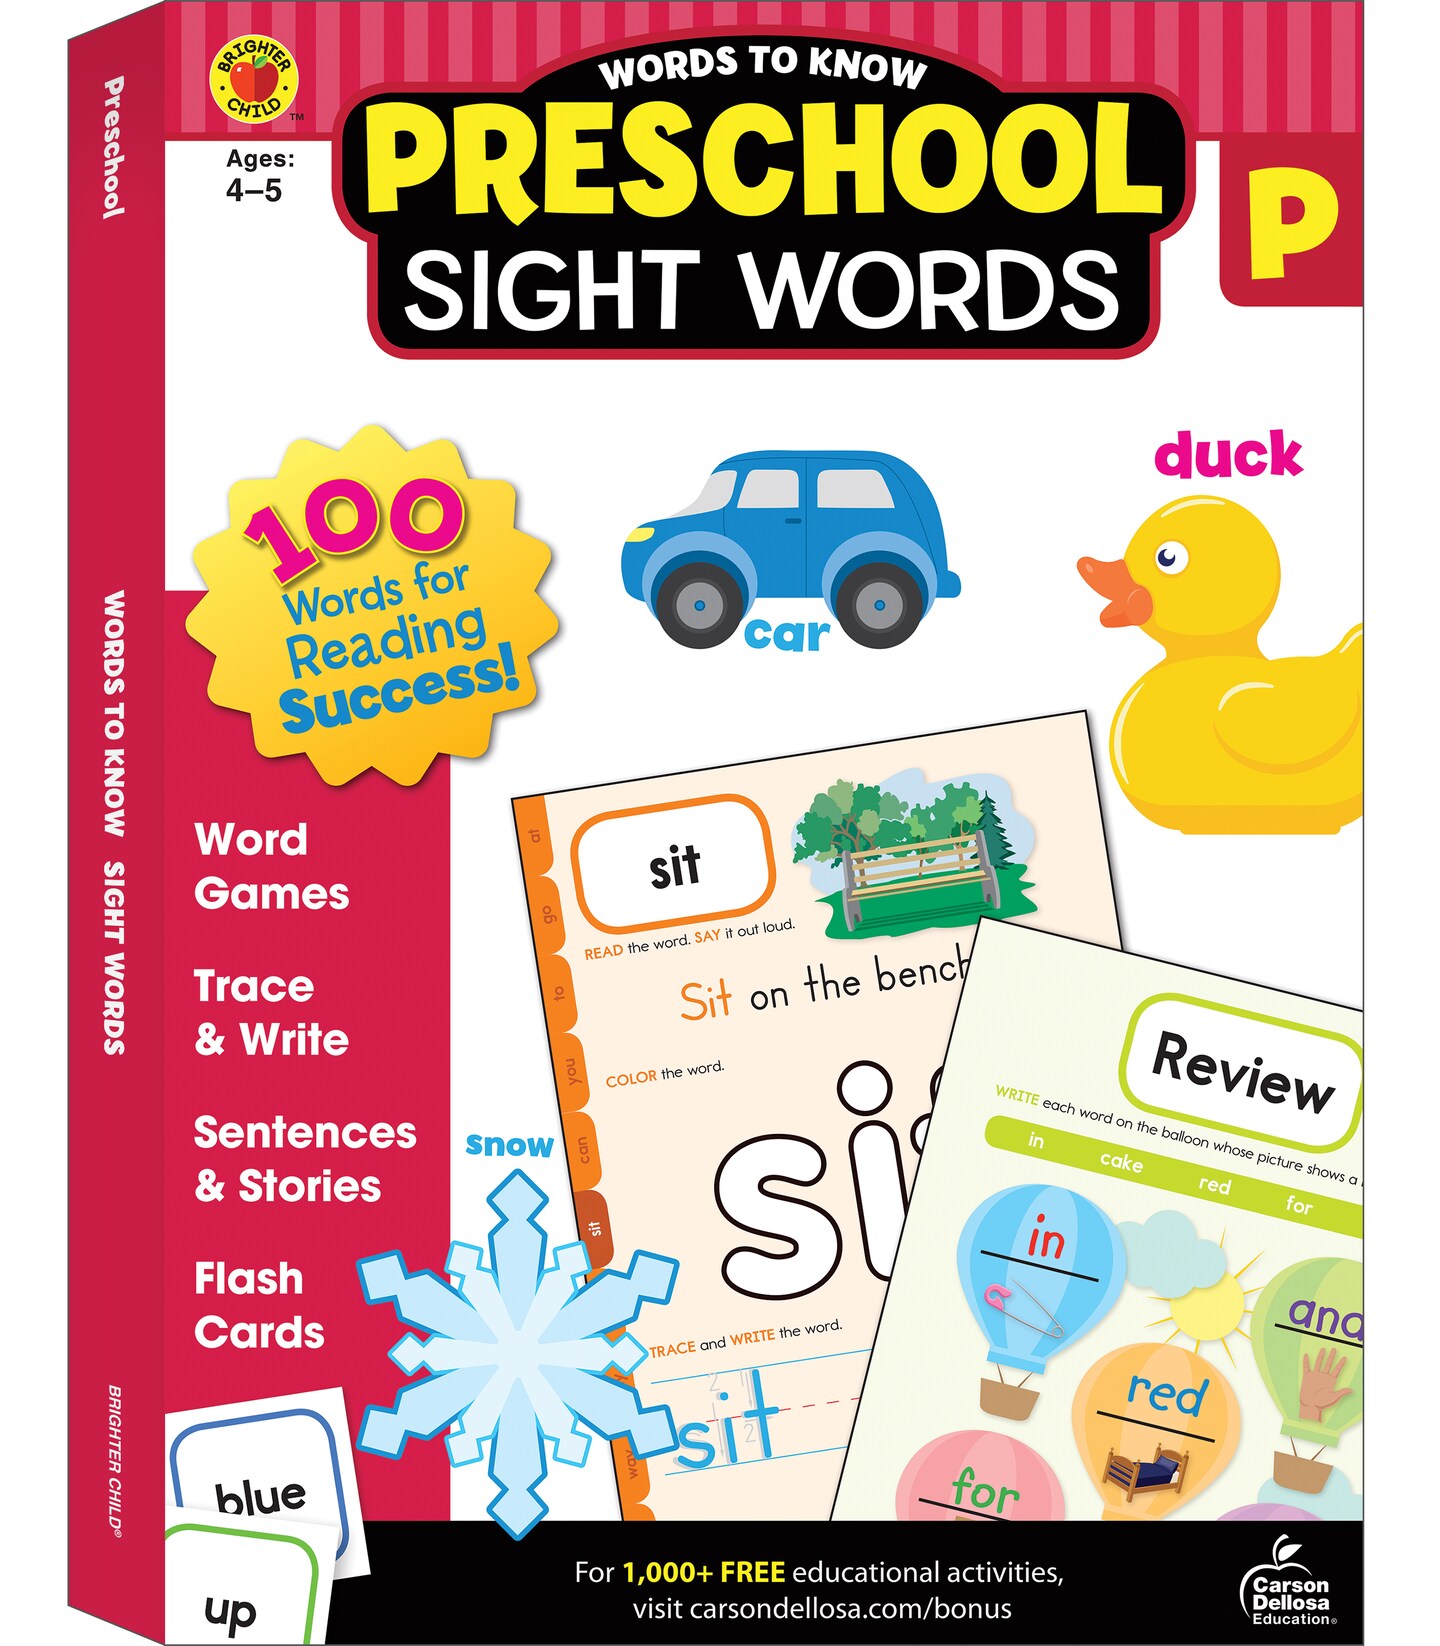 Carson Dellosa Words to Know Sight Words Preschool Workbook&#x2014;Reading Activities, Games, Puzzles, Flash Cards, Tracing and Coloring Pages for Learning and Practice (320 pgs)